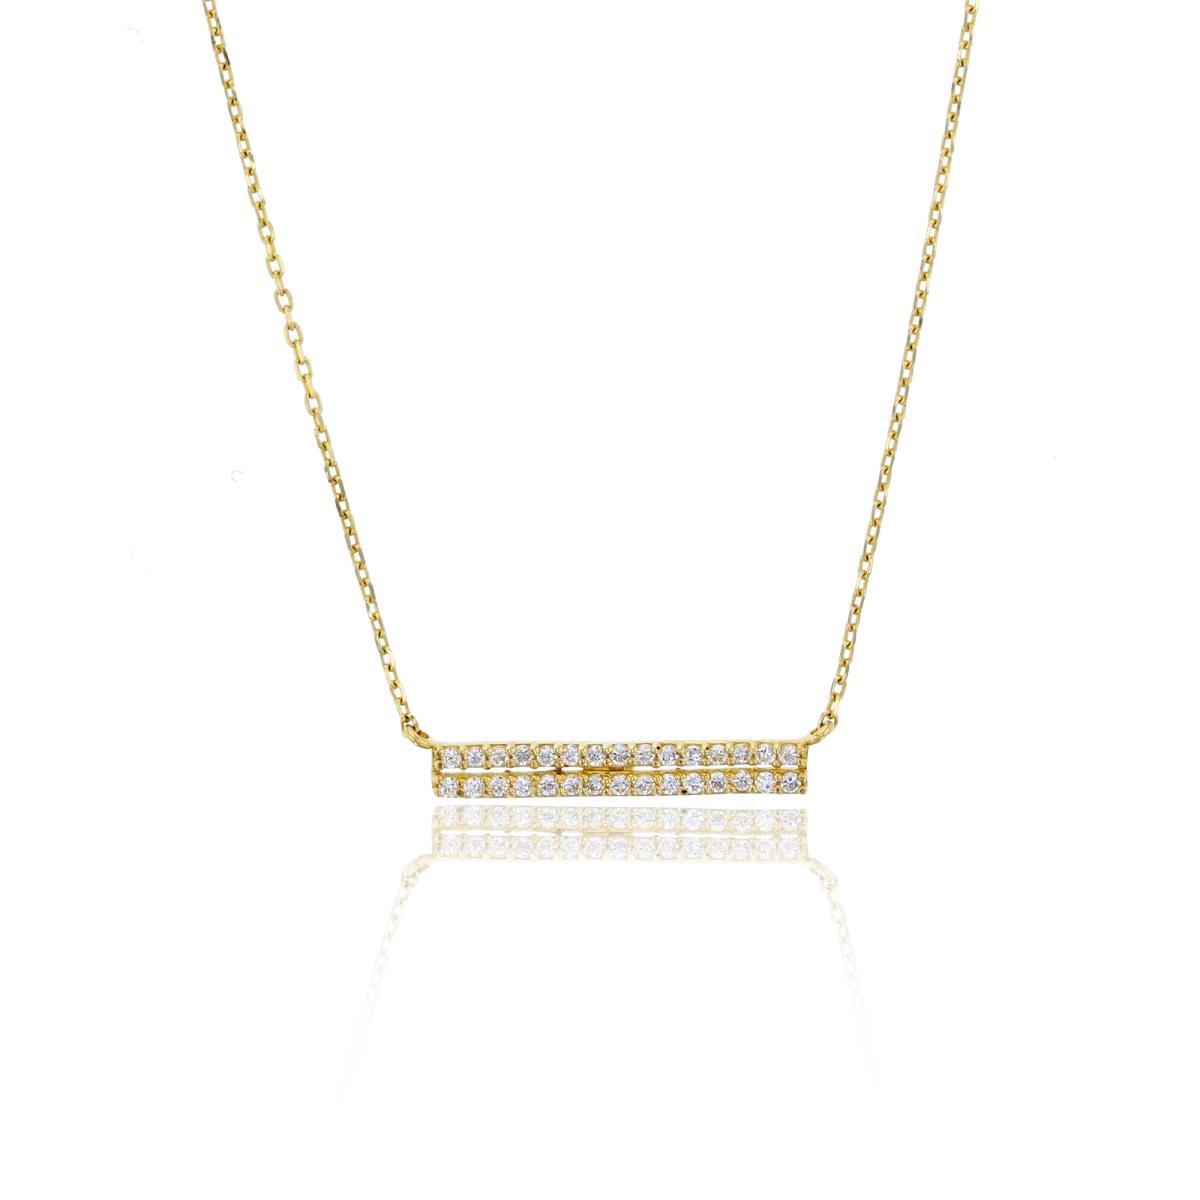 10KY Yellow Gold 18" Polished Pave 1.00mm Round Cut Two Row CZ Bar Necklace